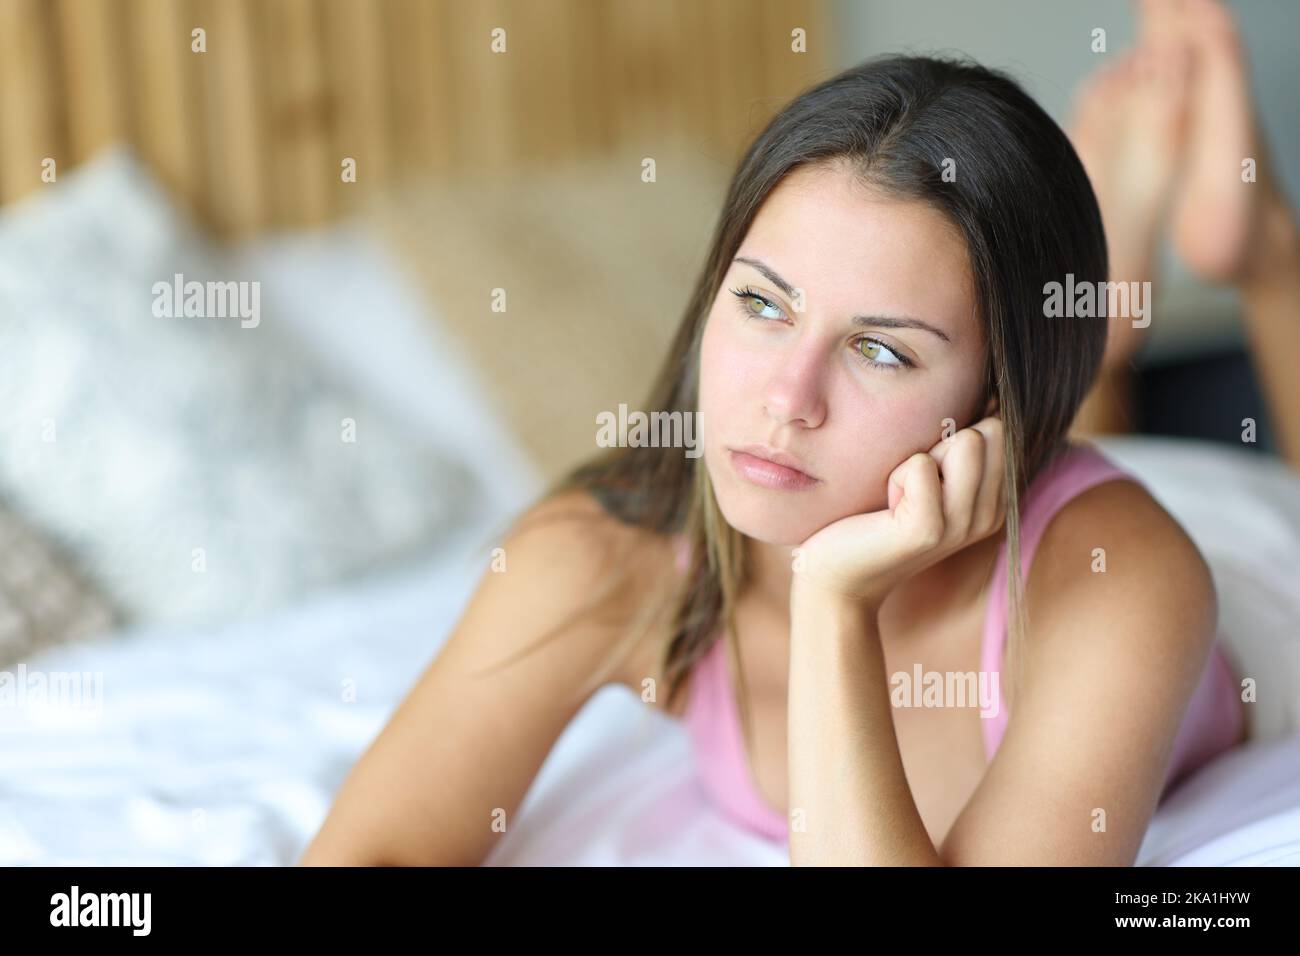 Distracted teen lying on a bed looking away at home Stock Photo